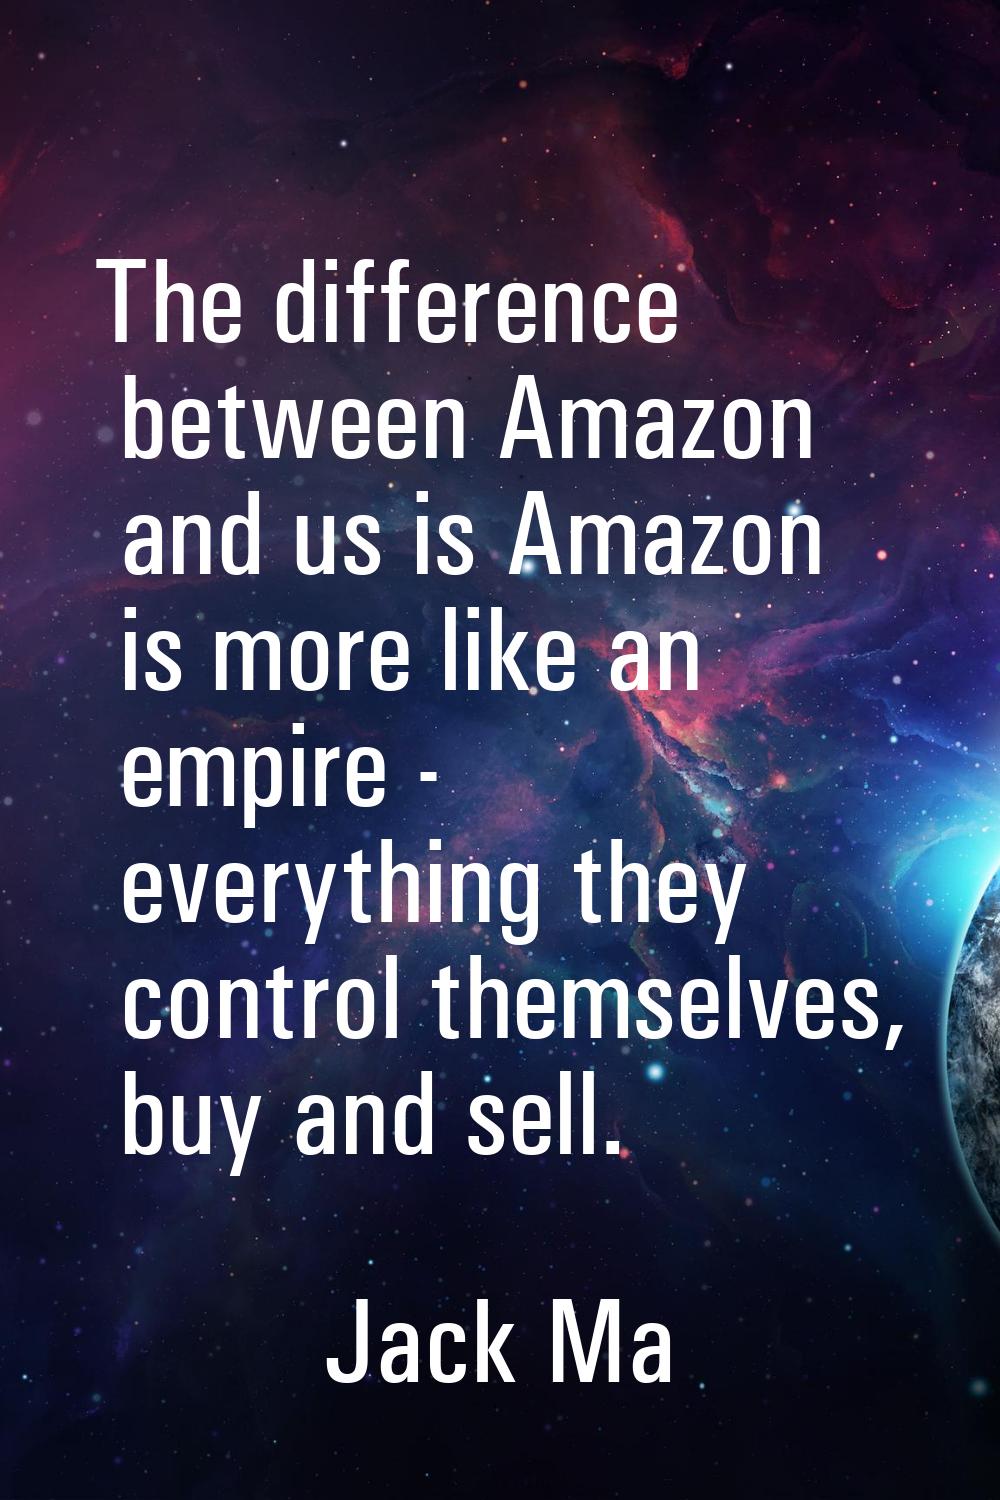 The difference between Amazon and us is Amazon is more like an empire - everything they control the